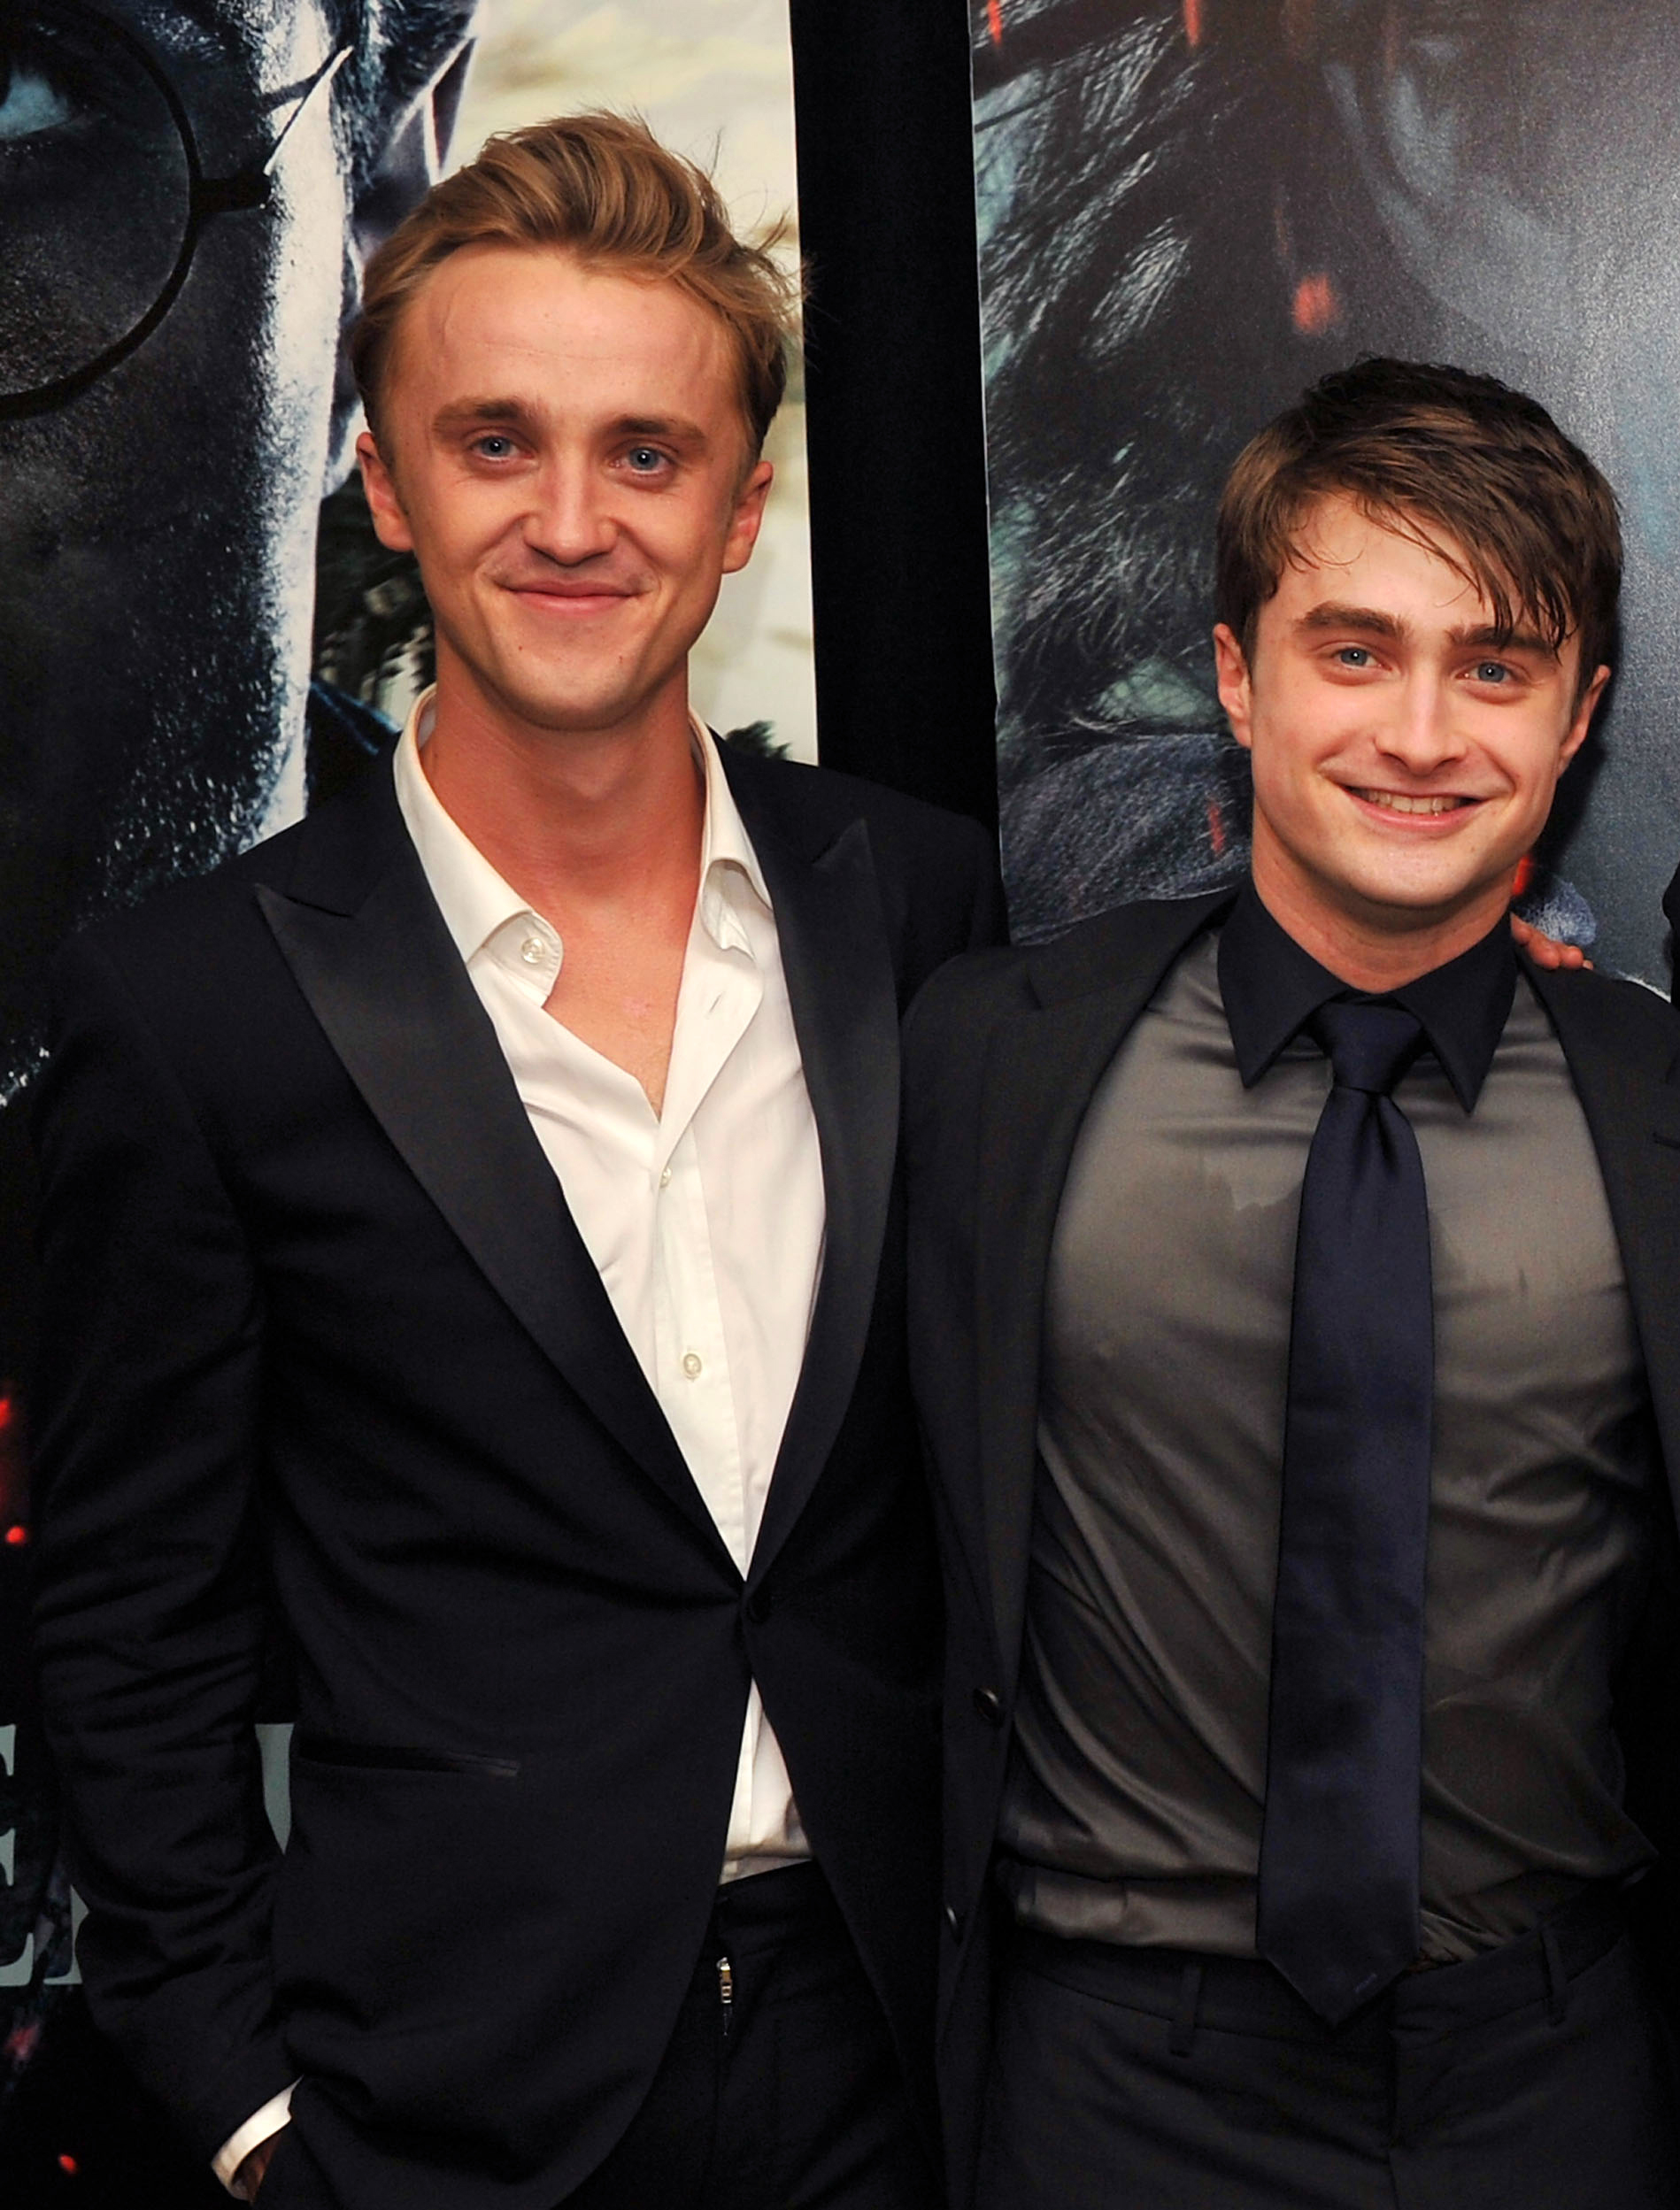 Daniel Radcliffe, Tom Felton Have 'Harry Potter' Reunion at NYC Play